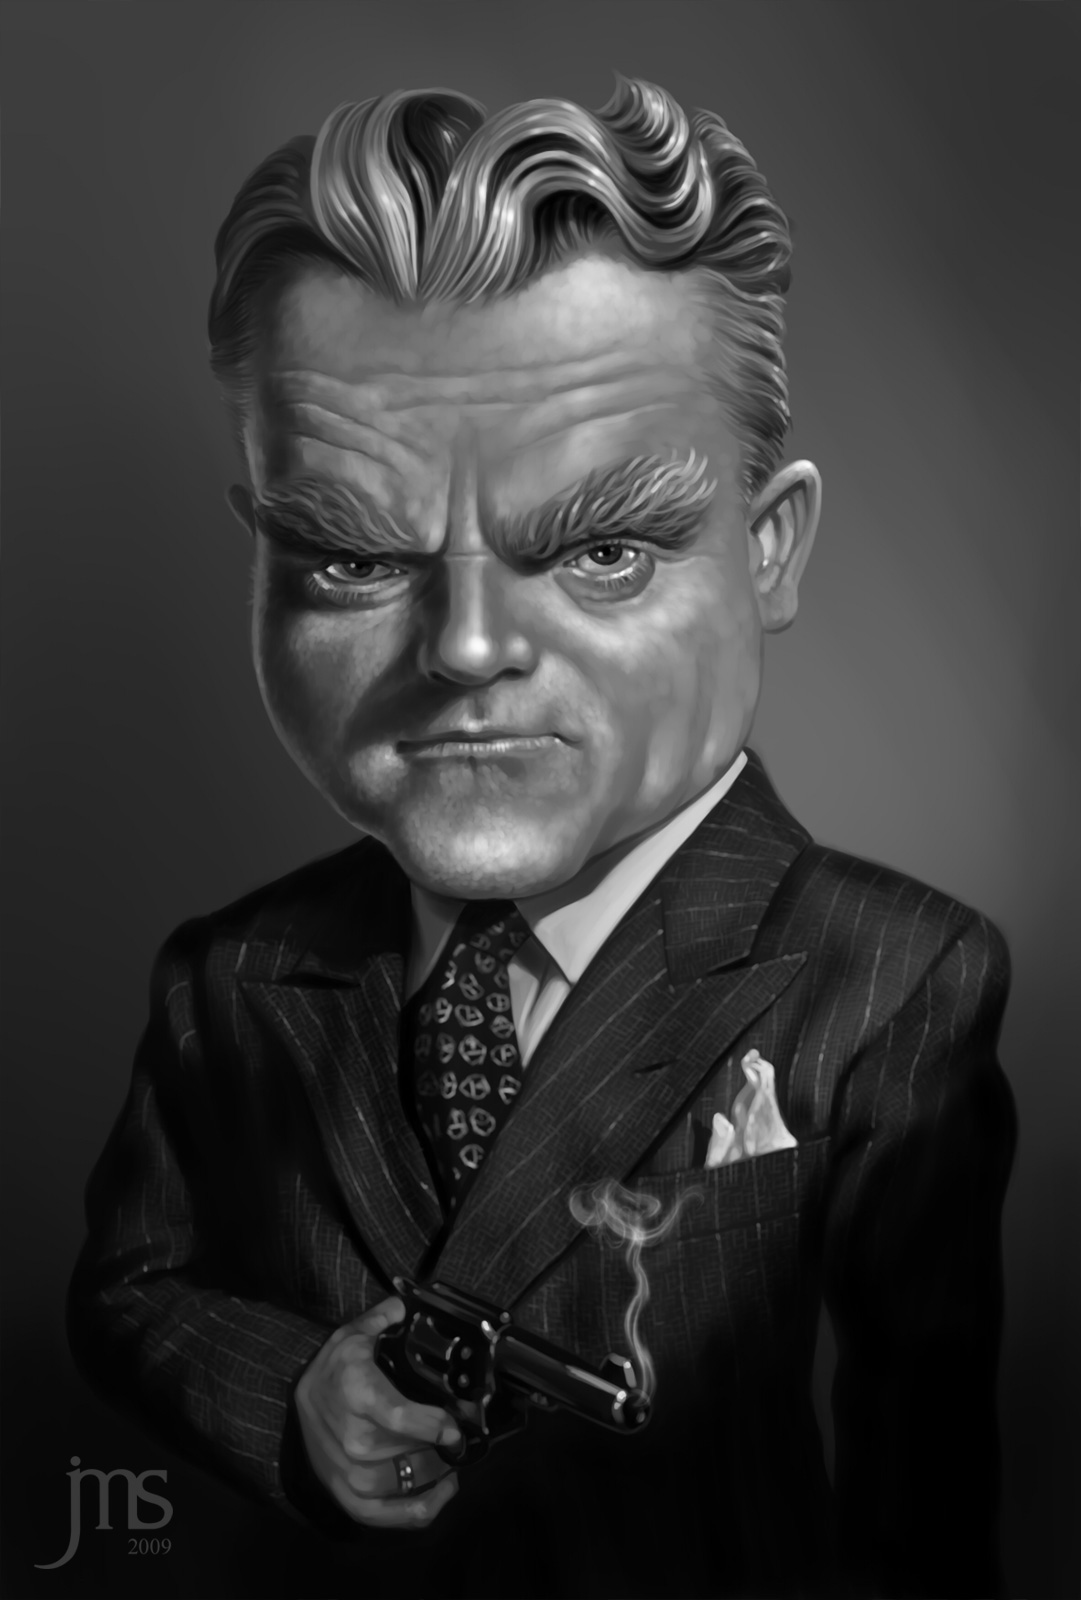 Cagney